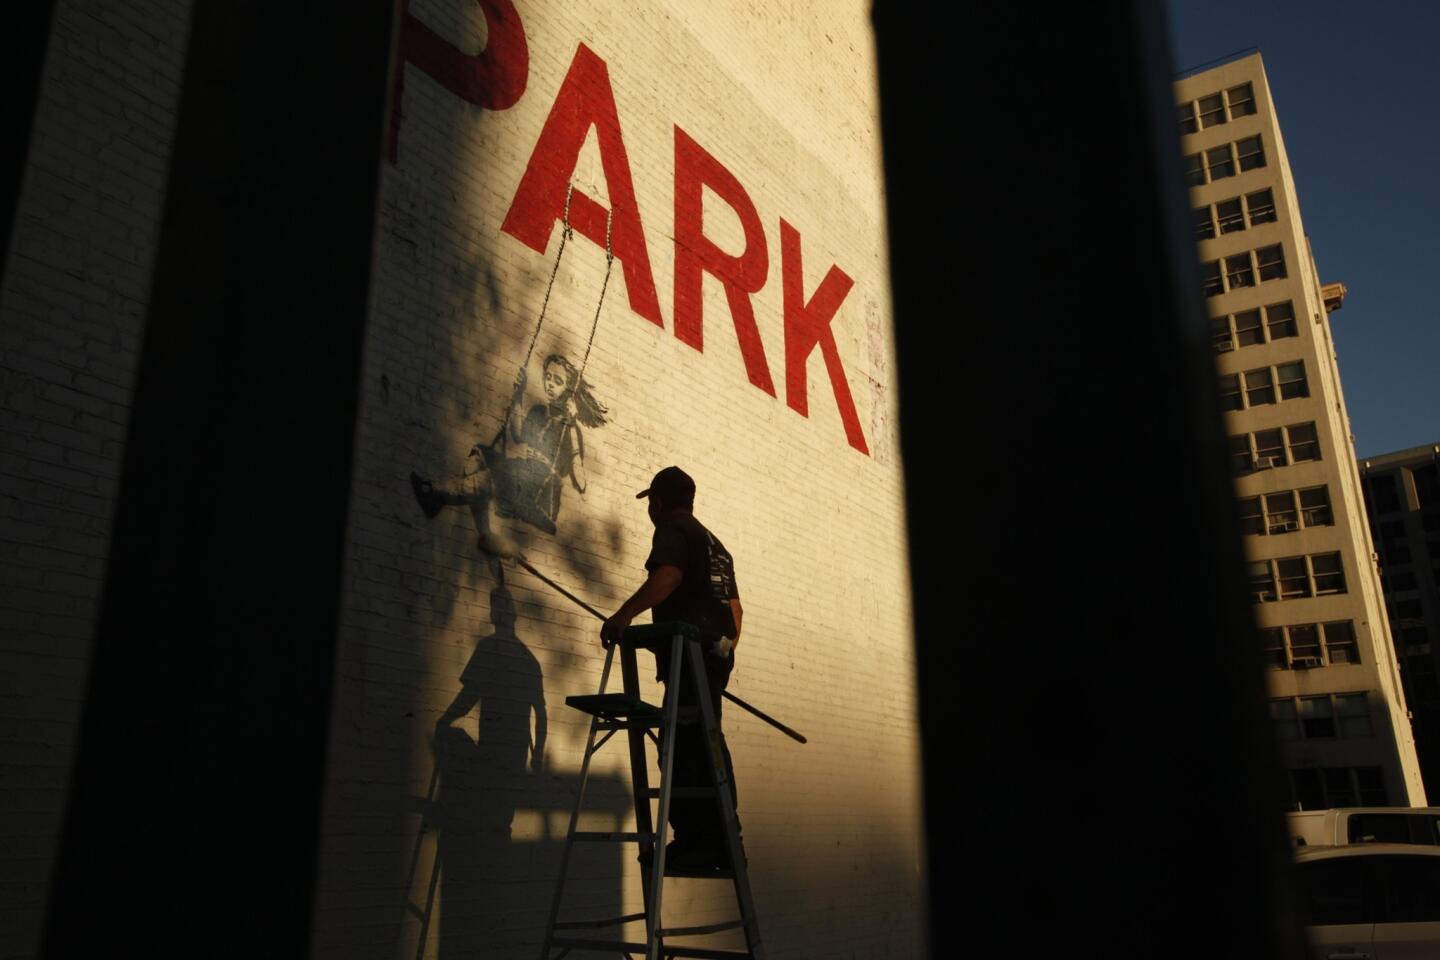 A young girl swings from the word "PARK" within Banksy's downtown Los Angeles mural. But an additional "ING" has been faded out by Banksy, turning the word "PARKING" into "PARK." Just down the block from this area, a downtown resident group is looking to find a little more than $6 million to transform a parking lot into a community park with a playground.